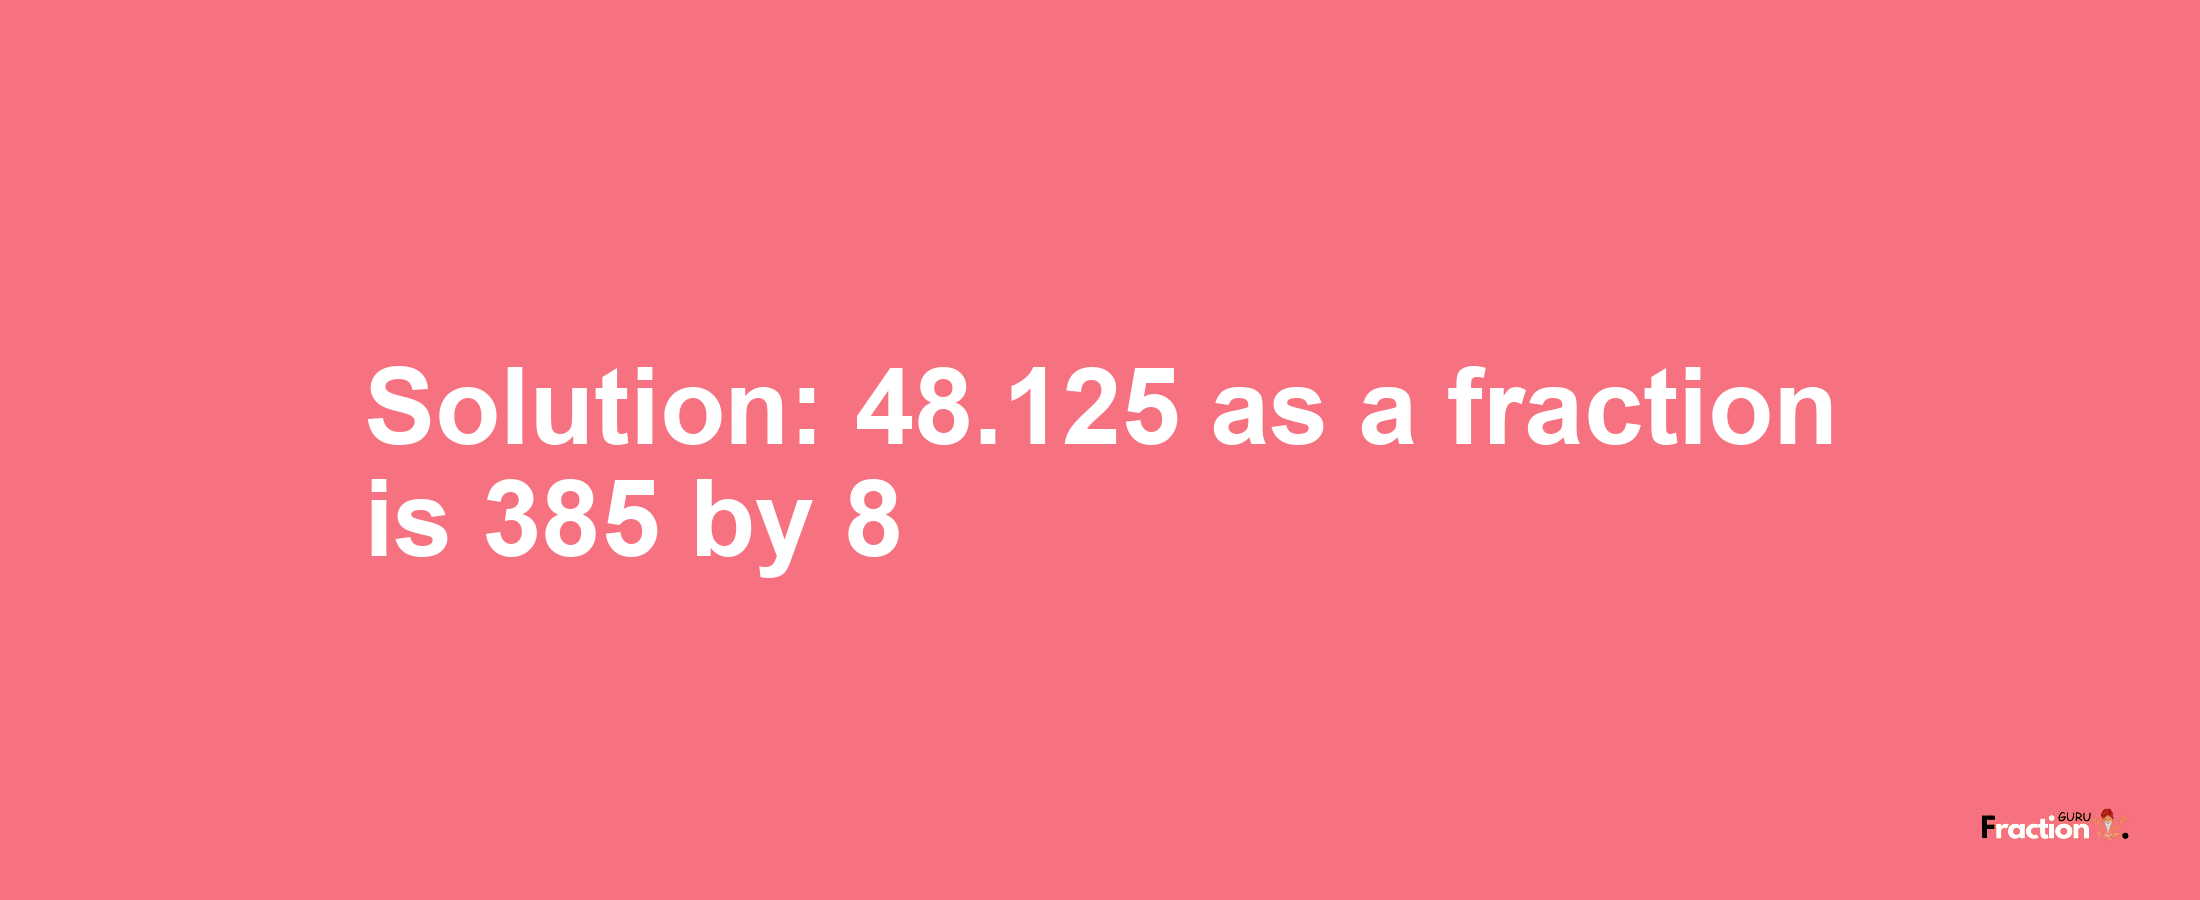 Solution:48.125 as a fraction is 385/8